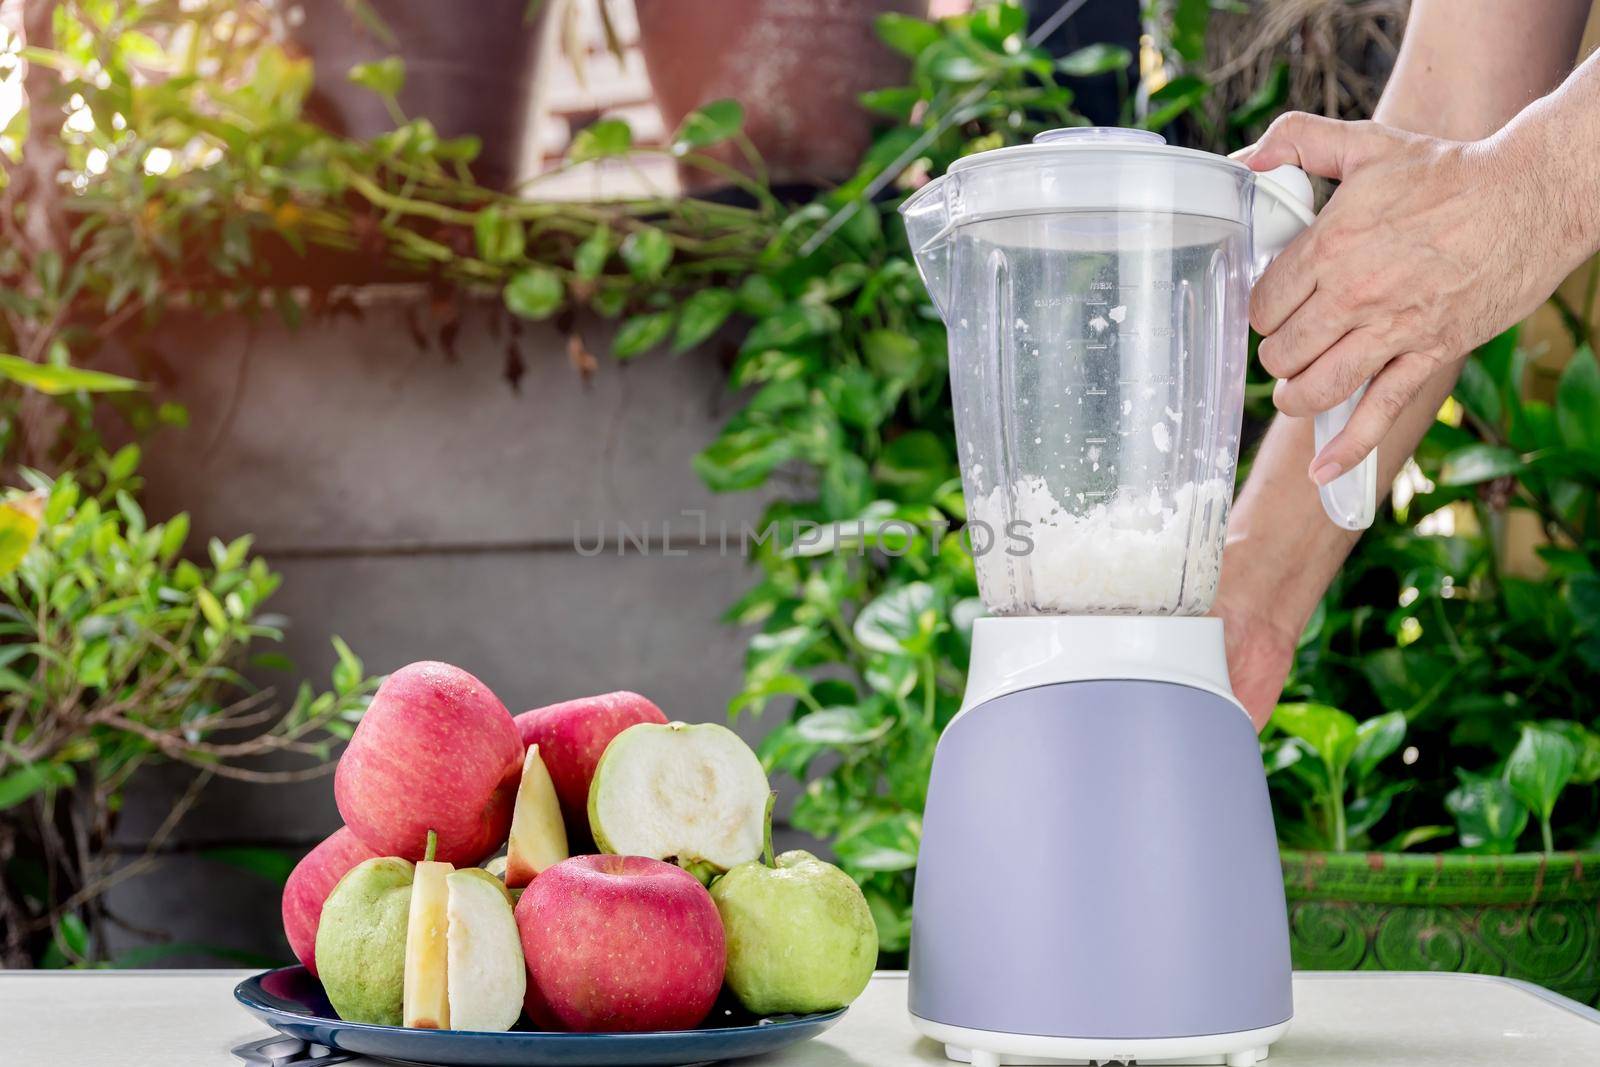 Hand of people are using an electric blender to making fresh apple and guava juice.